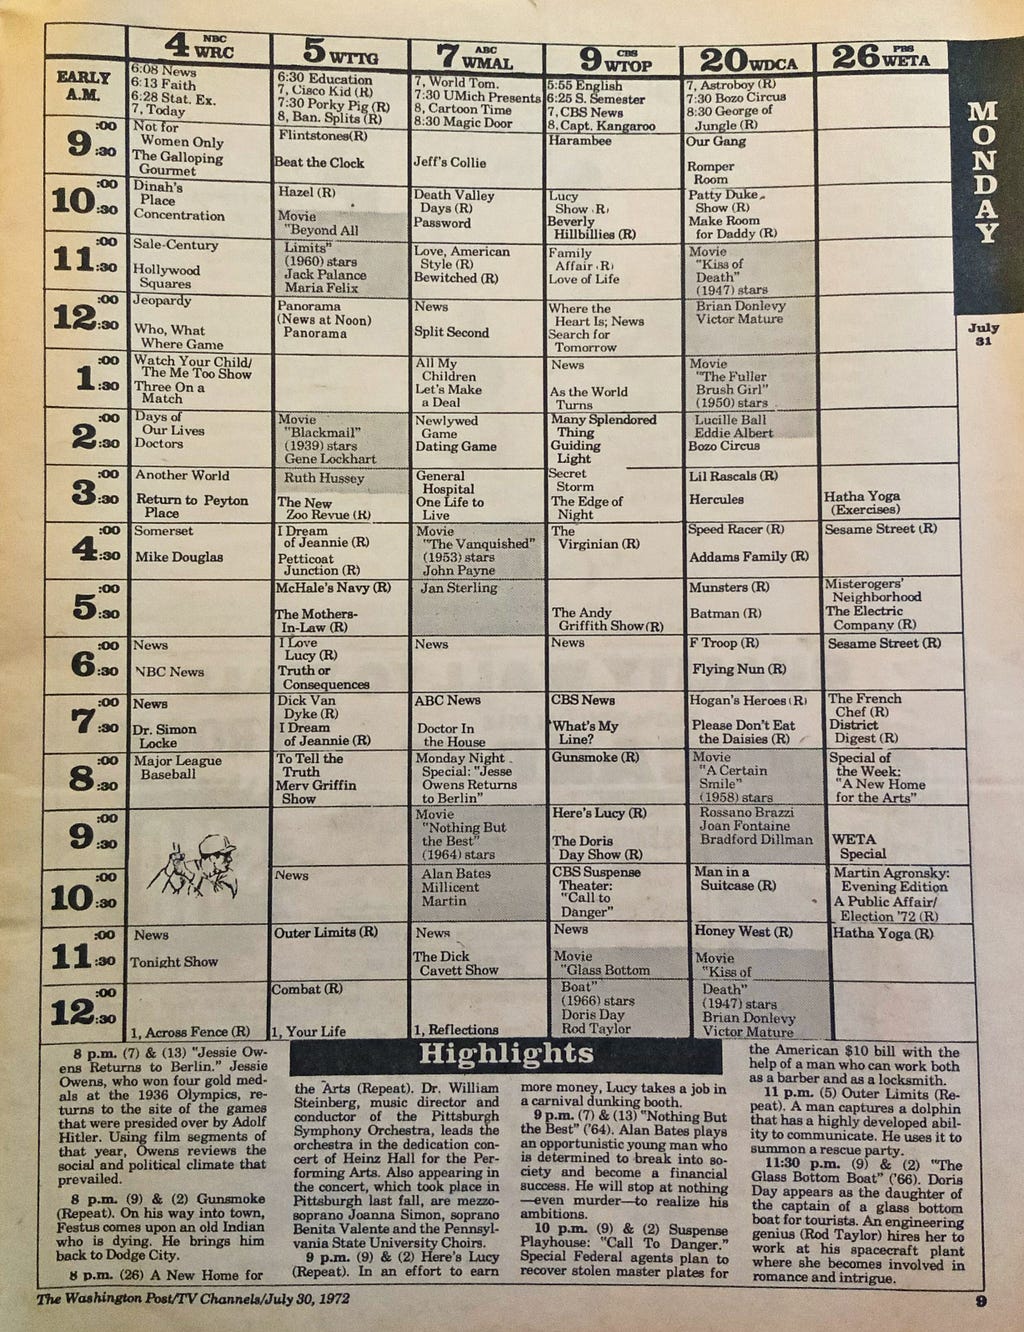 The page from a television guide from the 1970s is depicted. It is a tabular format with the hours of the day on the left, and the channels on the top of the page. Old time shows are depicted like the Andy Griffith Show, Speedracer and Batman.